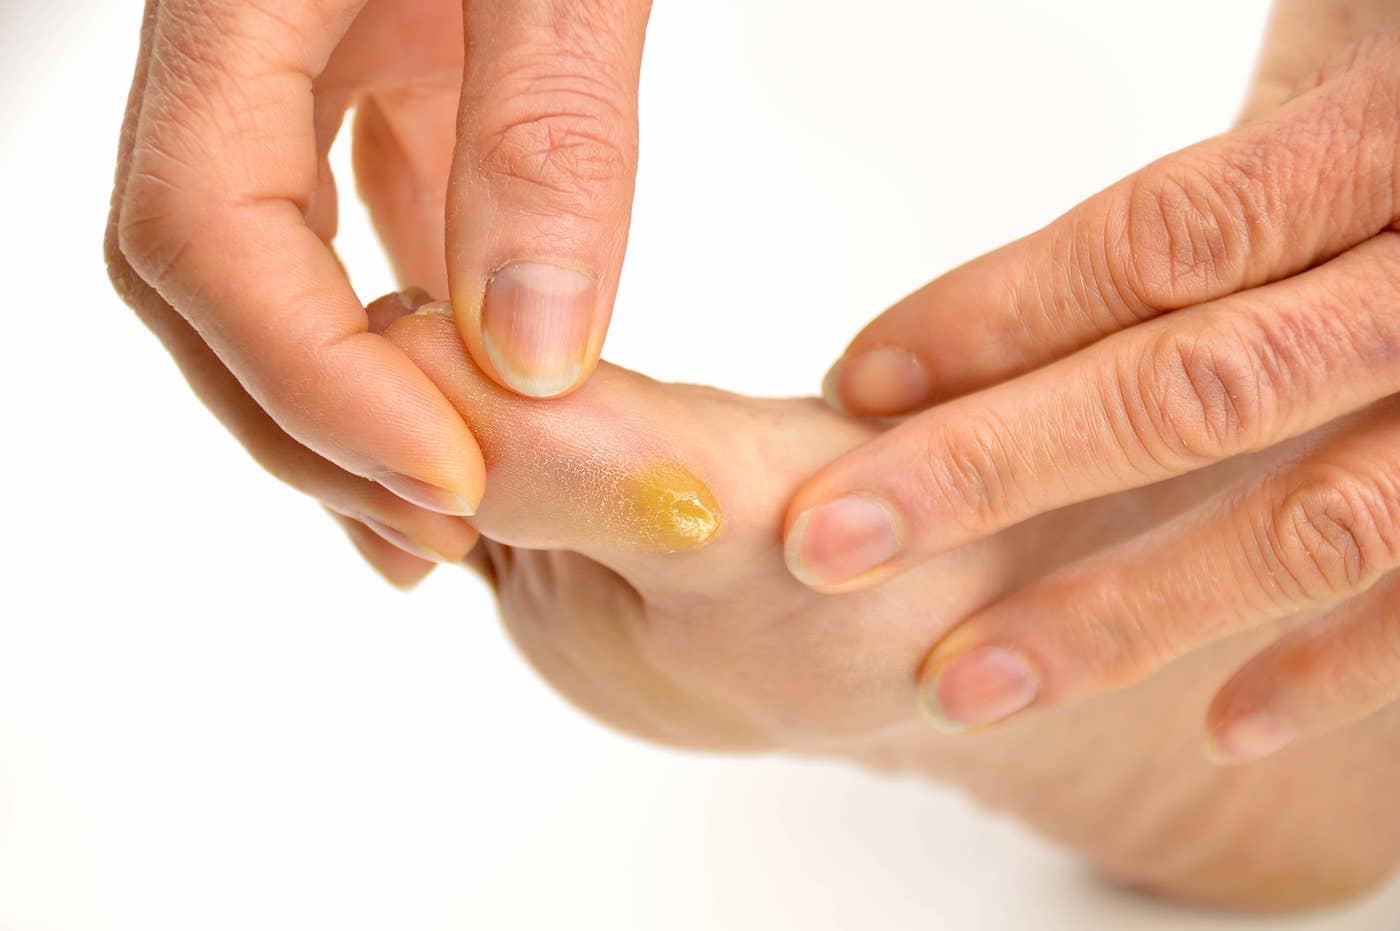 How to Remove Calluses